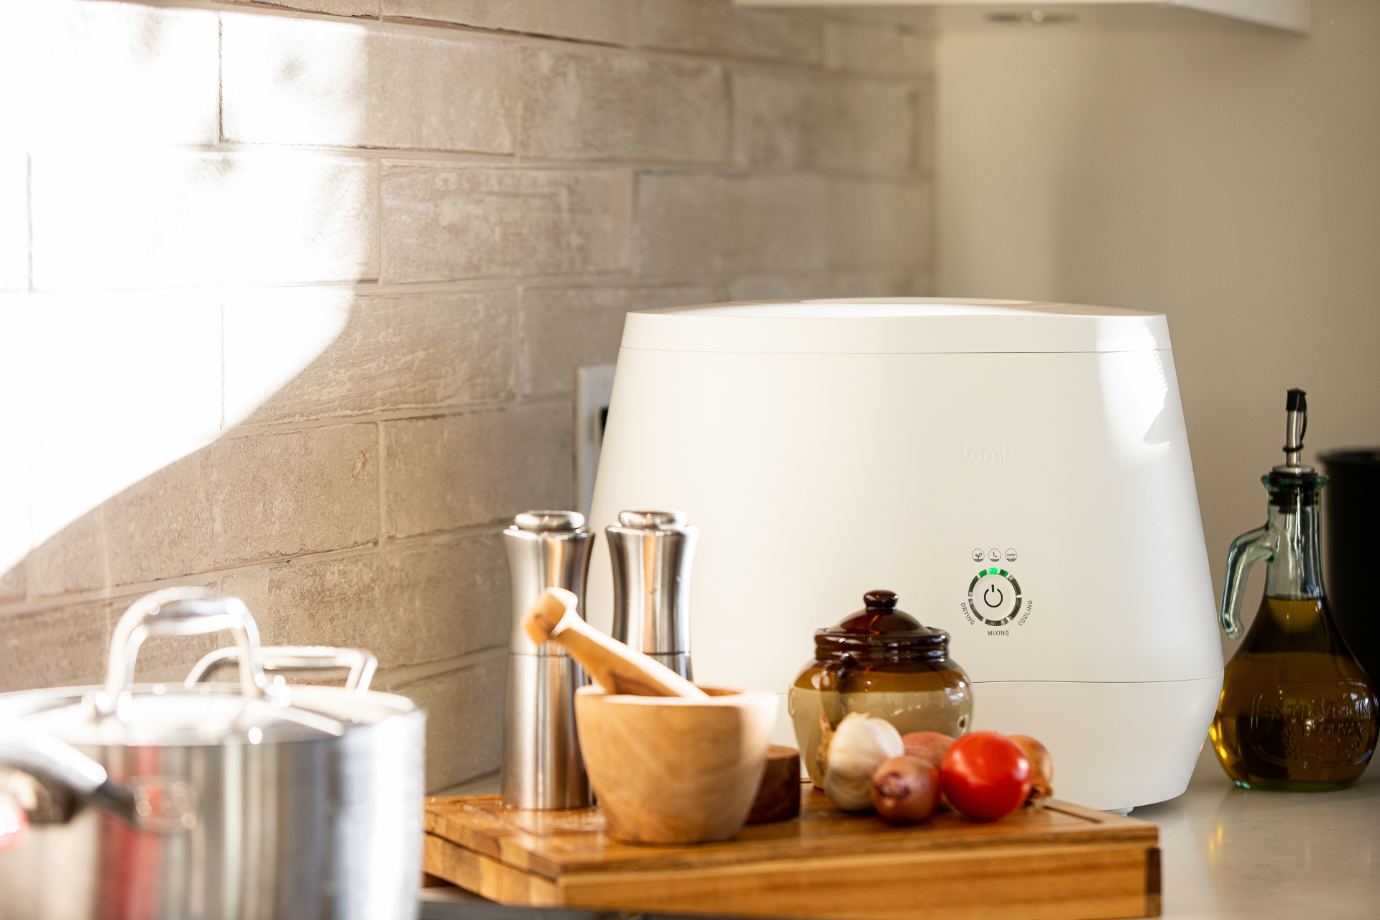 25 Smart Kitchen Appliances To Make Your Life Easier in 2022 – Lomi